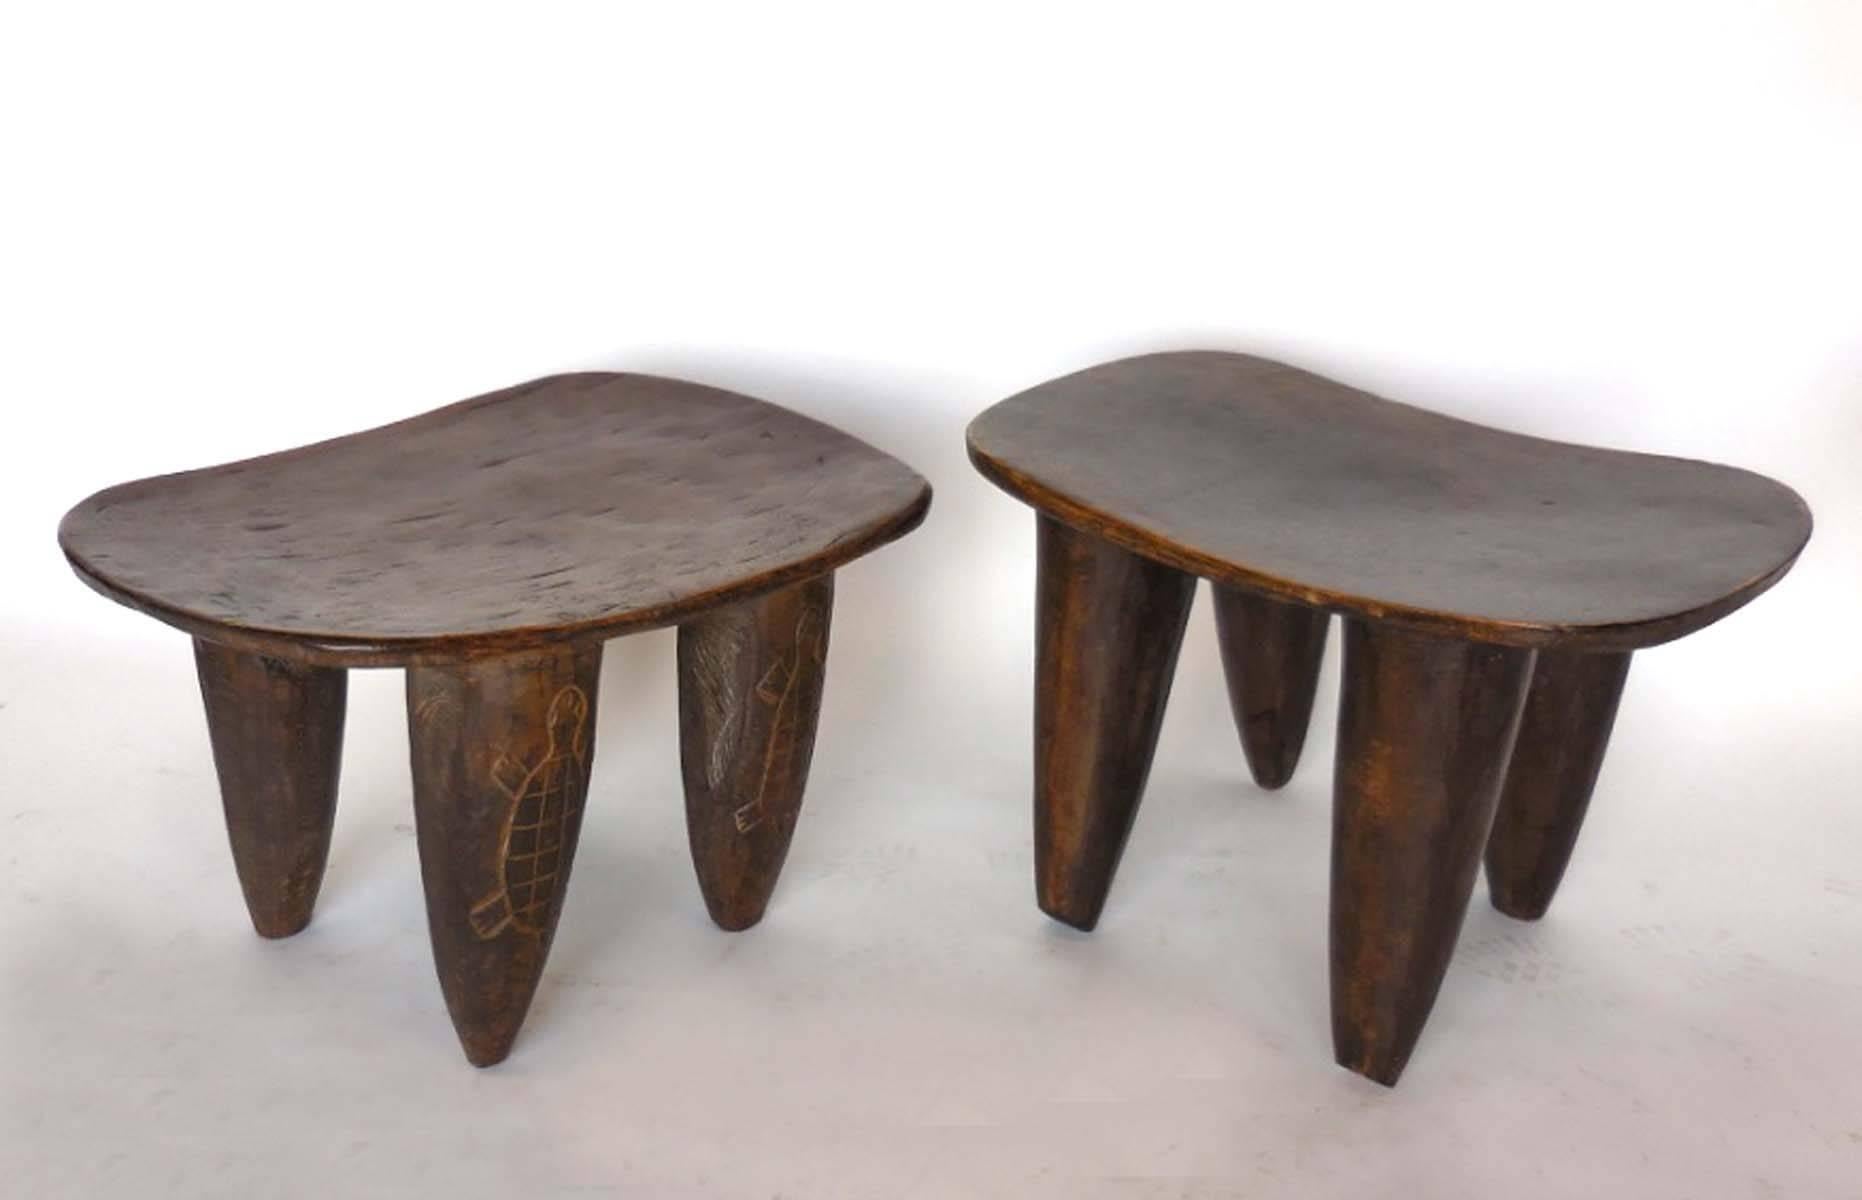 Malian Tribal Hand-Carved Stool from Mali - LEFT ONE AVAILABLE